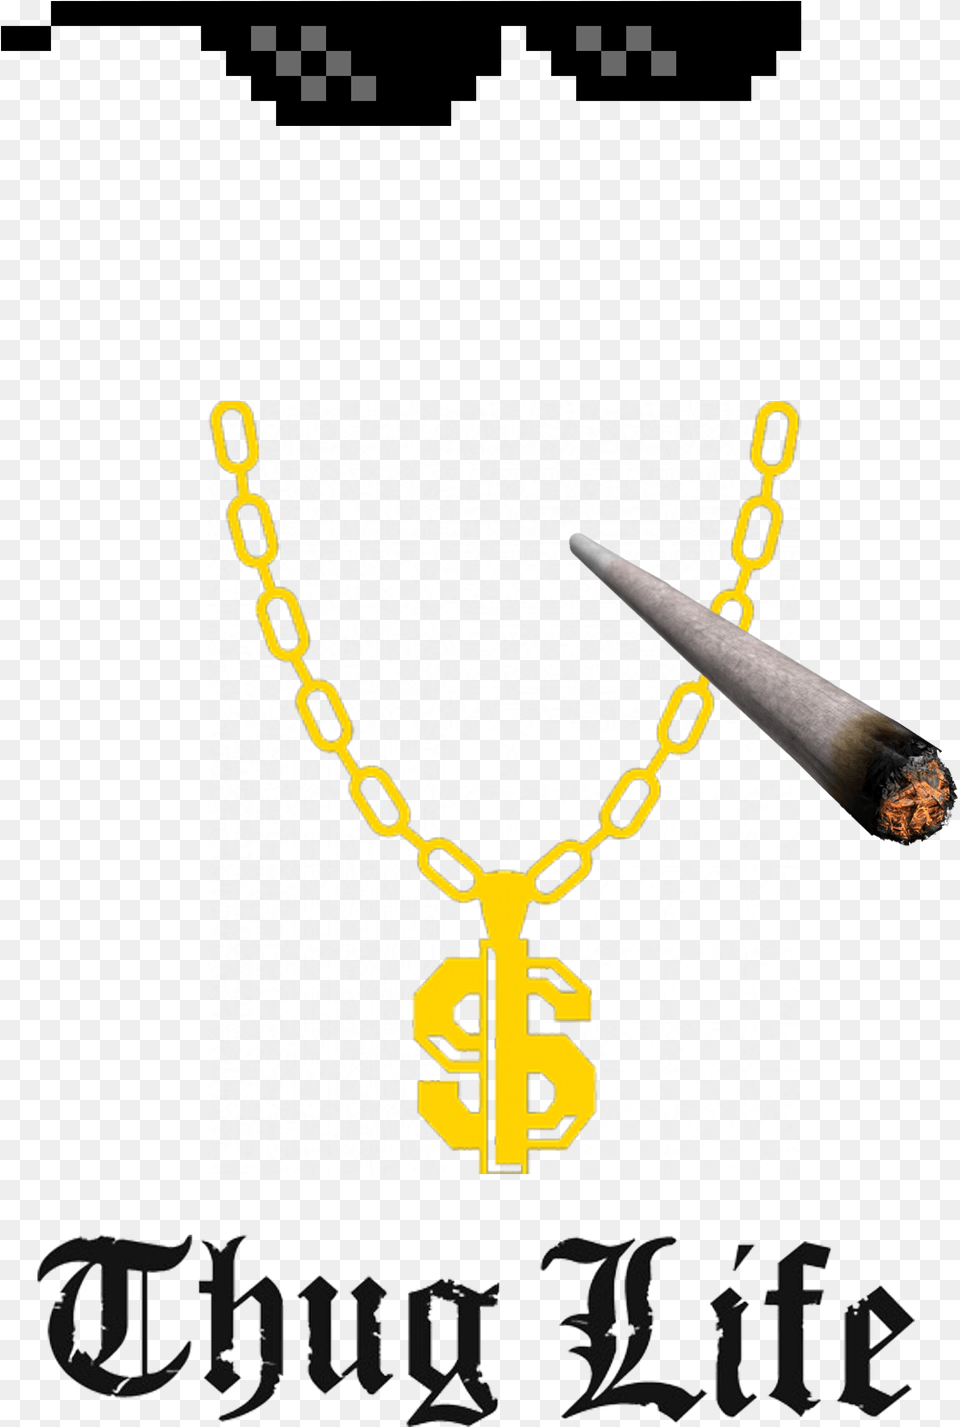 Text Joint Chain Glasses Thug Life Cigarette, Accessories, Smoke Pipe Free Png